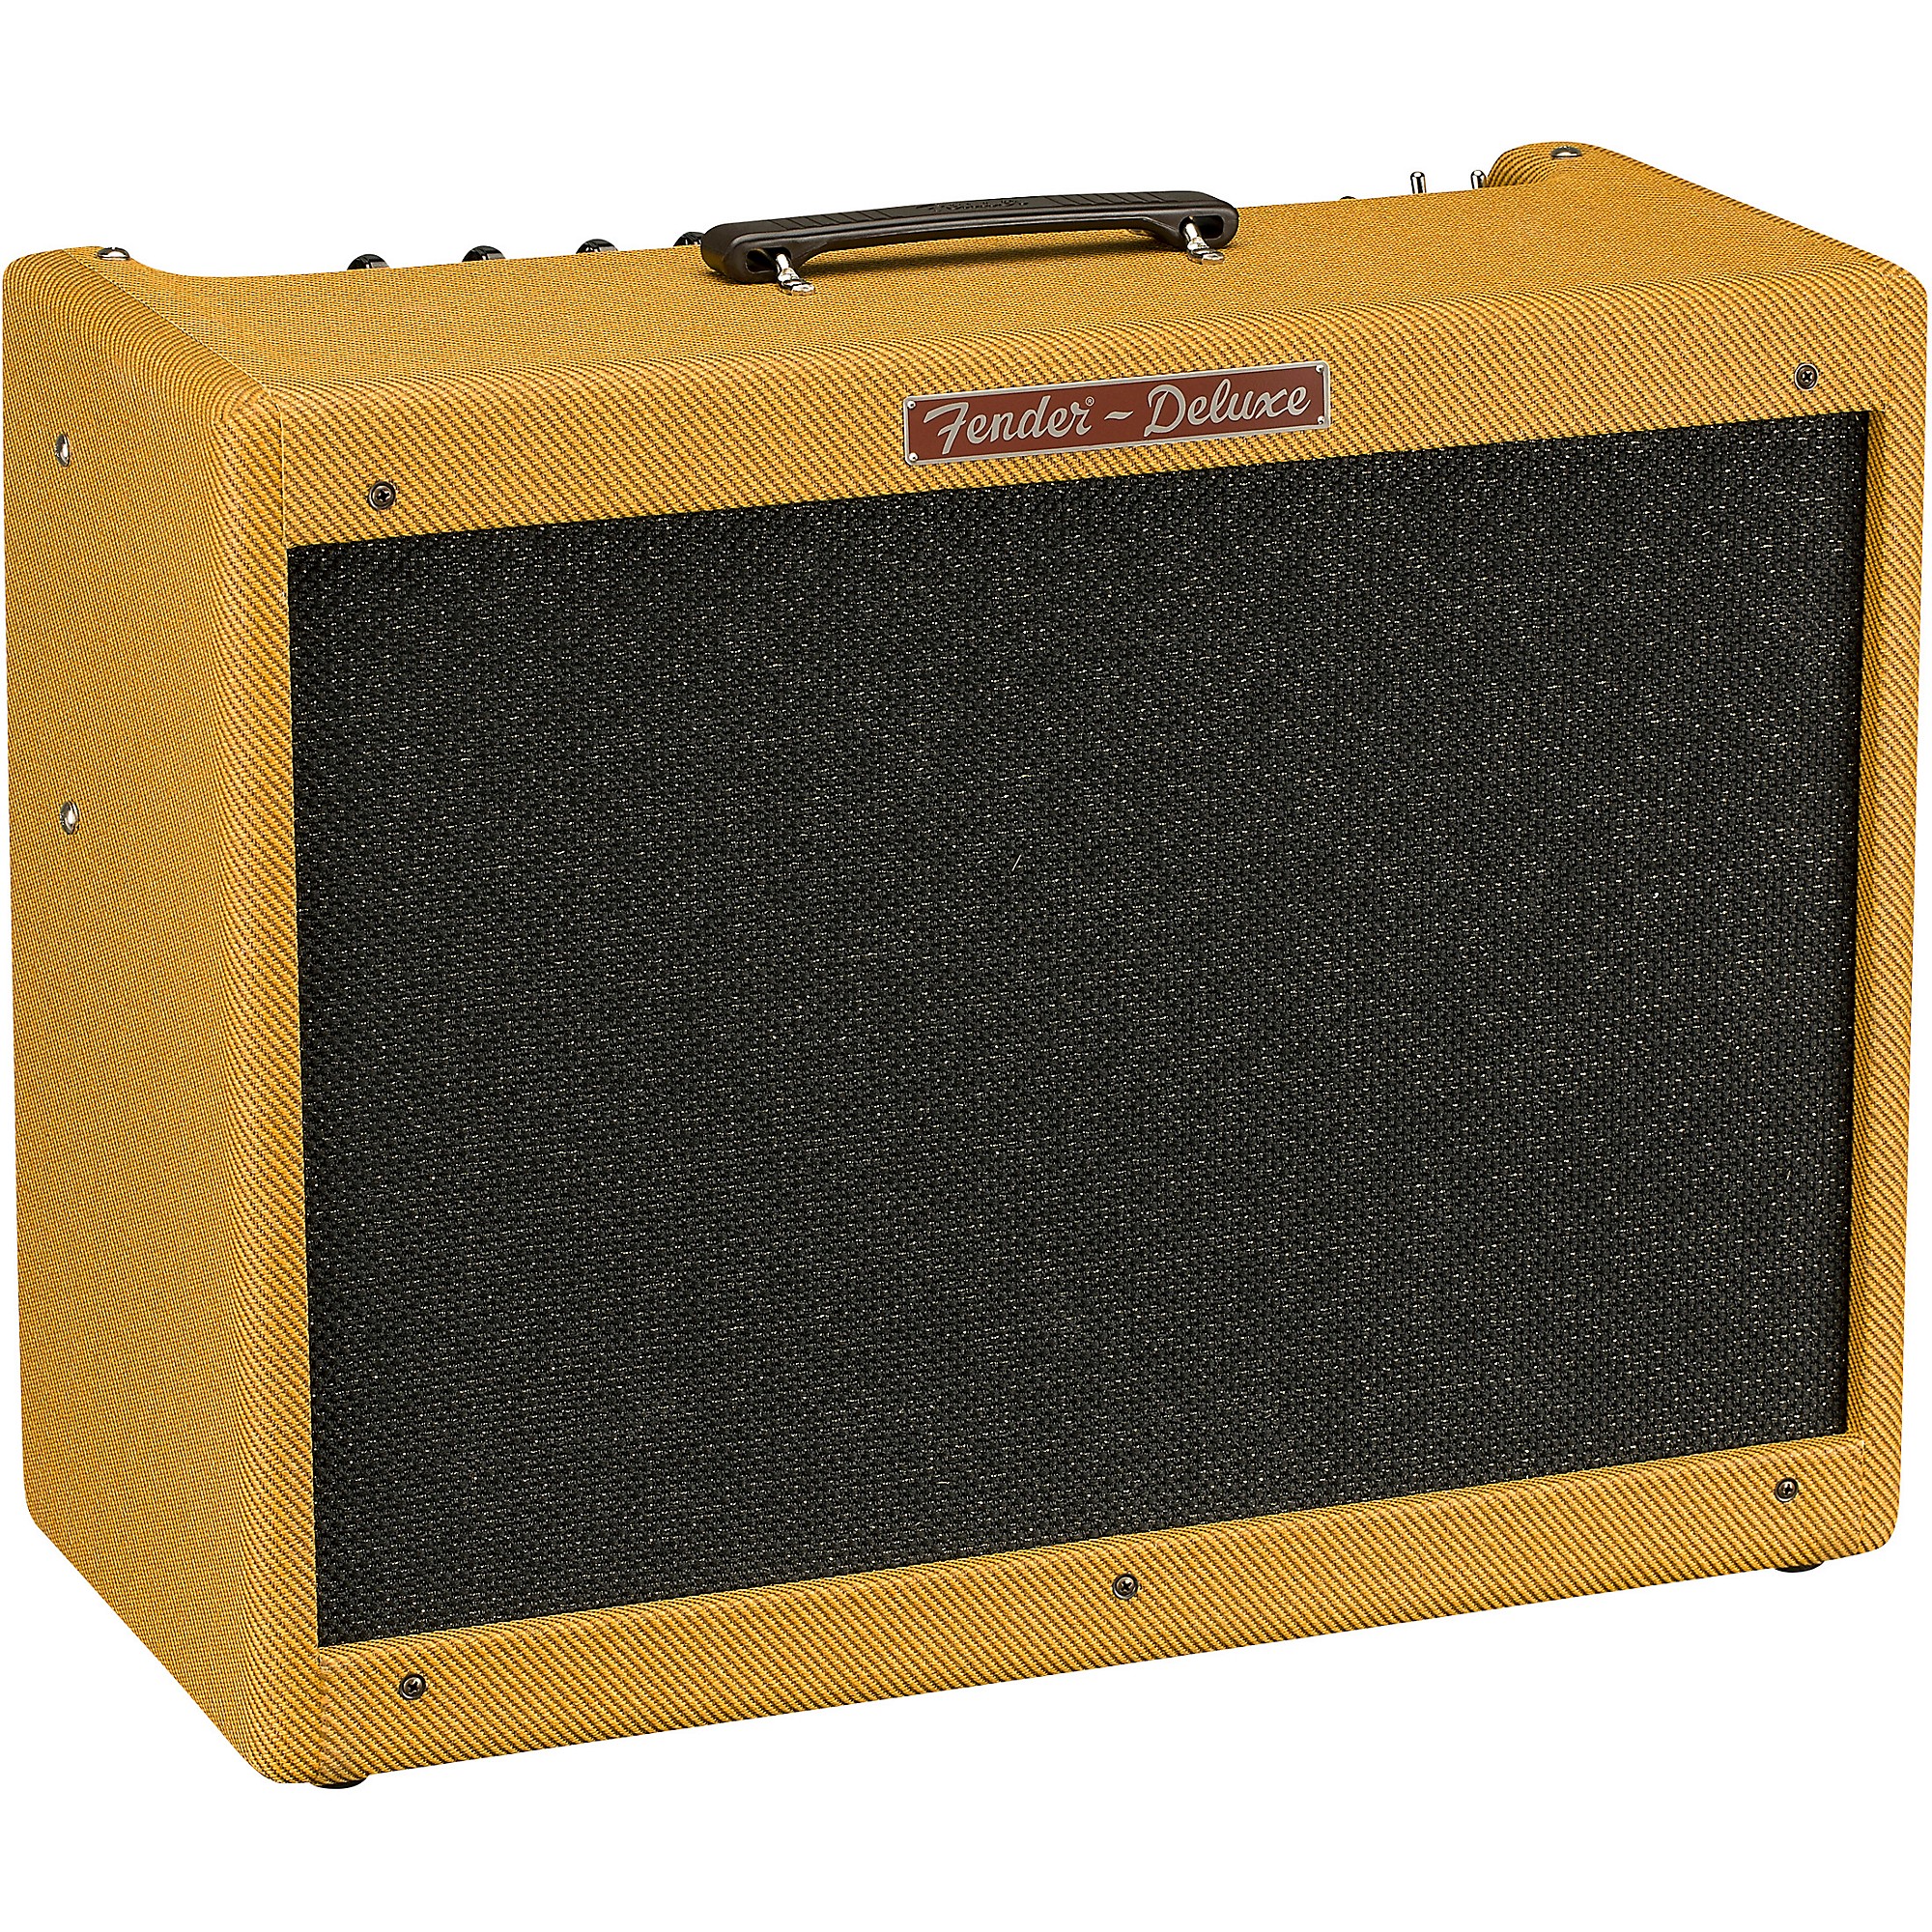 Fender Limited-Edition Hot Rod Deluxe IV 40W 1x12 Tube Combo Amp 